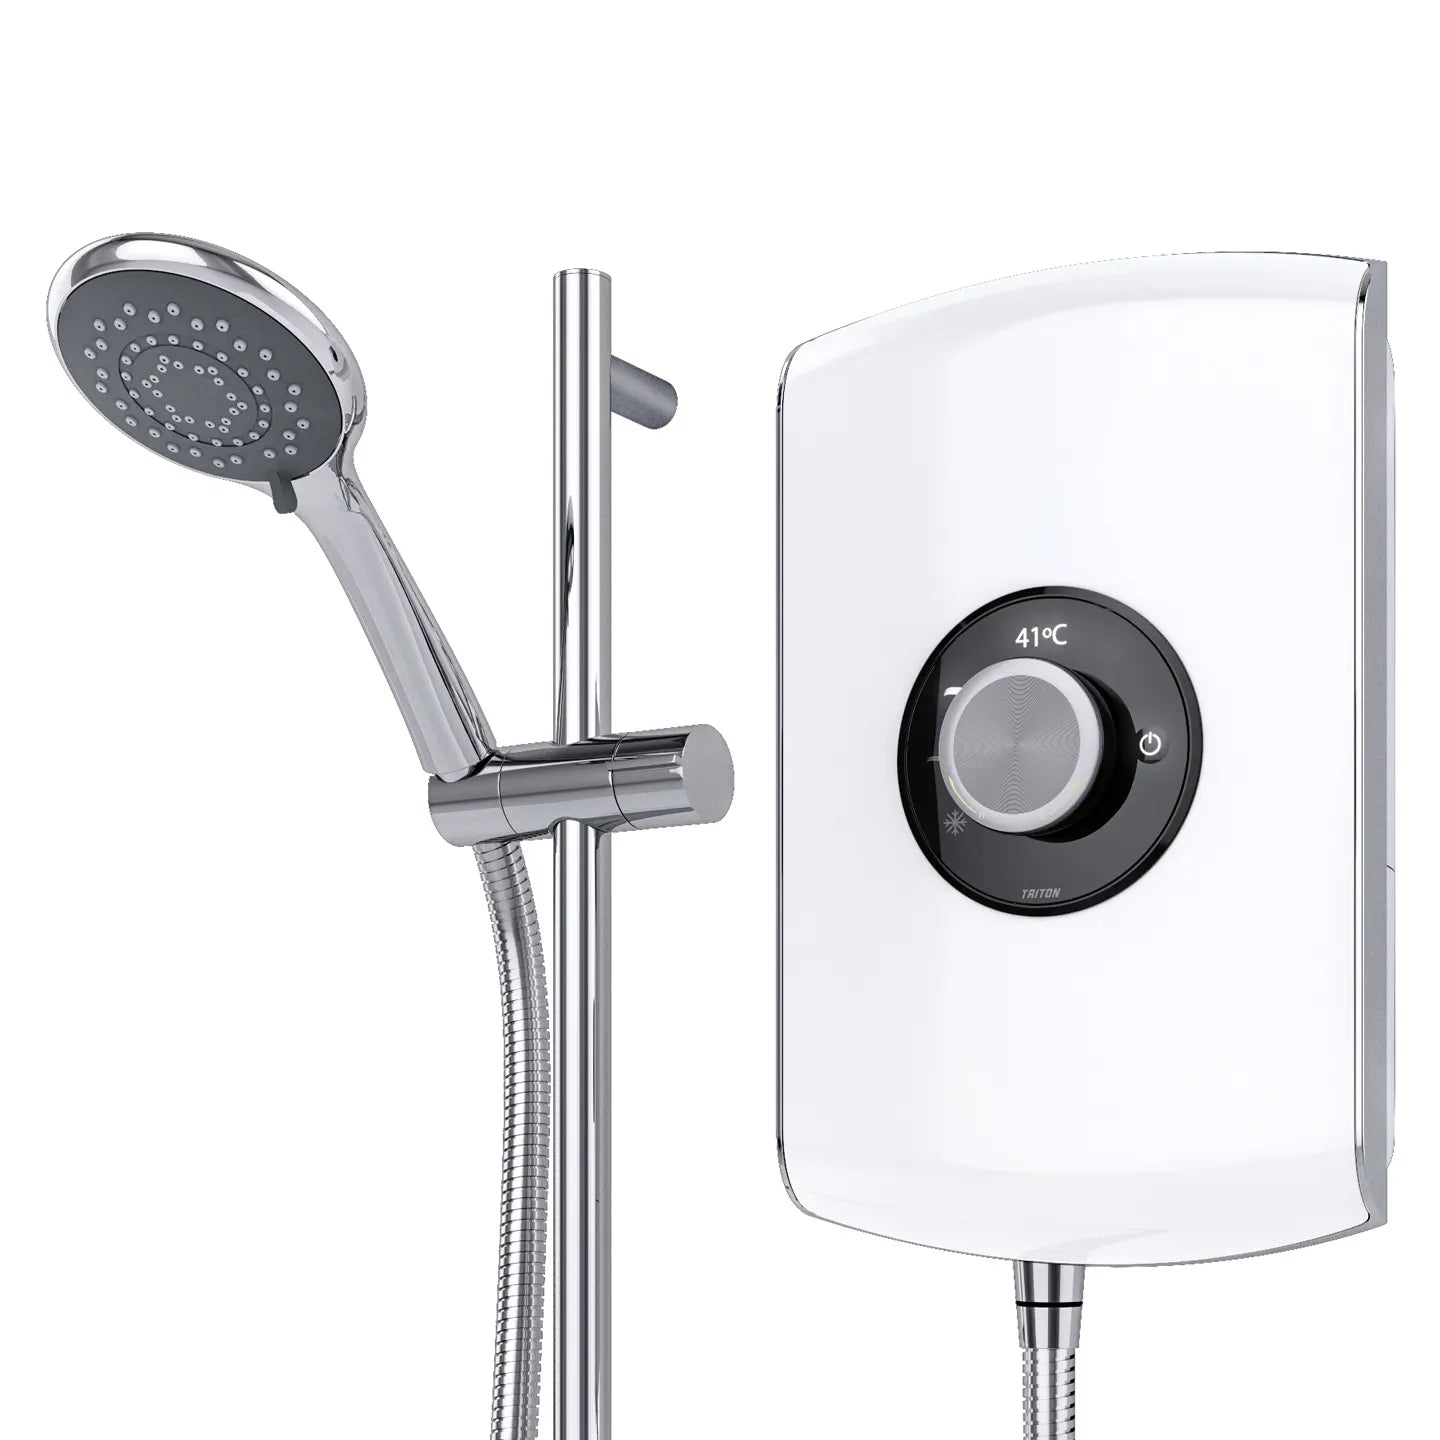 Triton Amore Electric Shower - 8.5kW Brushed Steel 0096